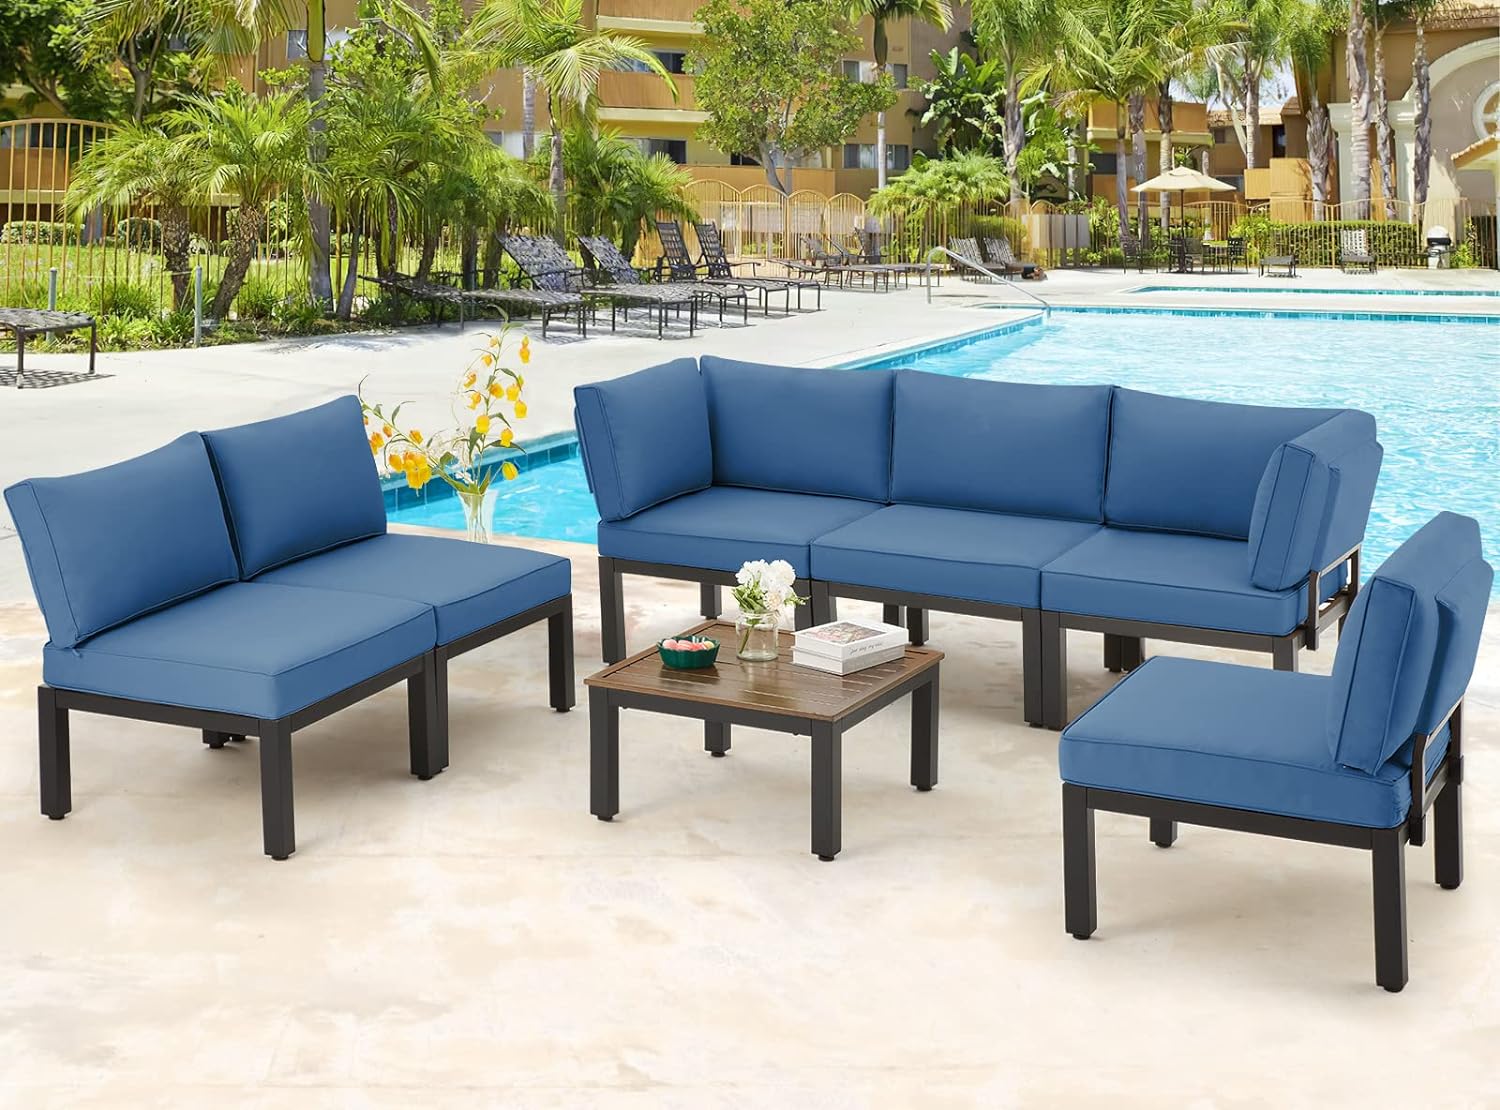 AECOJOY Outdoor Patio Furniture Set, Metal Patio Sectional Conversation Sofa, Black Wrought Iron Outdoor Furniture Sets Clearance with Navy Blue Cushions